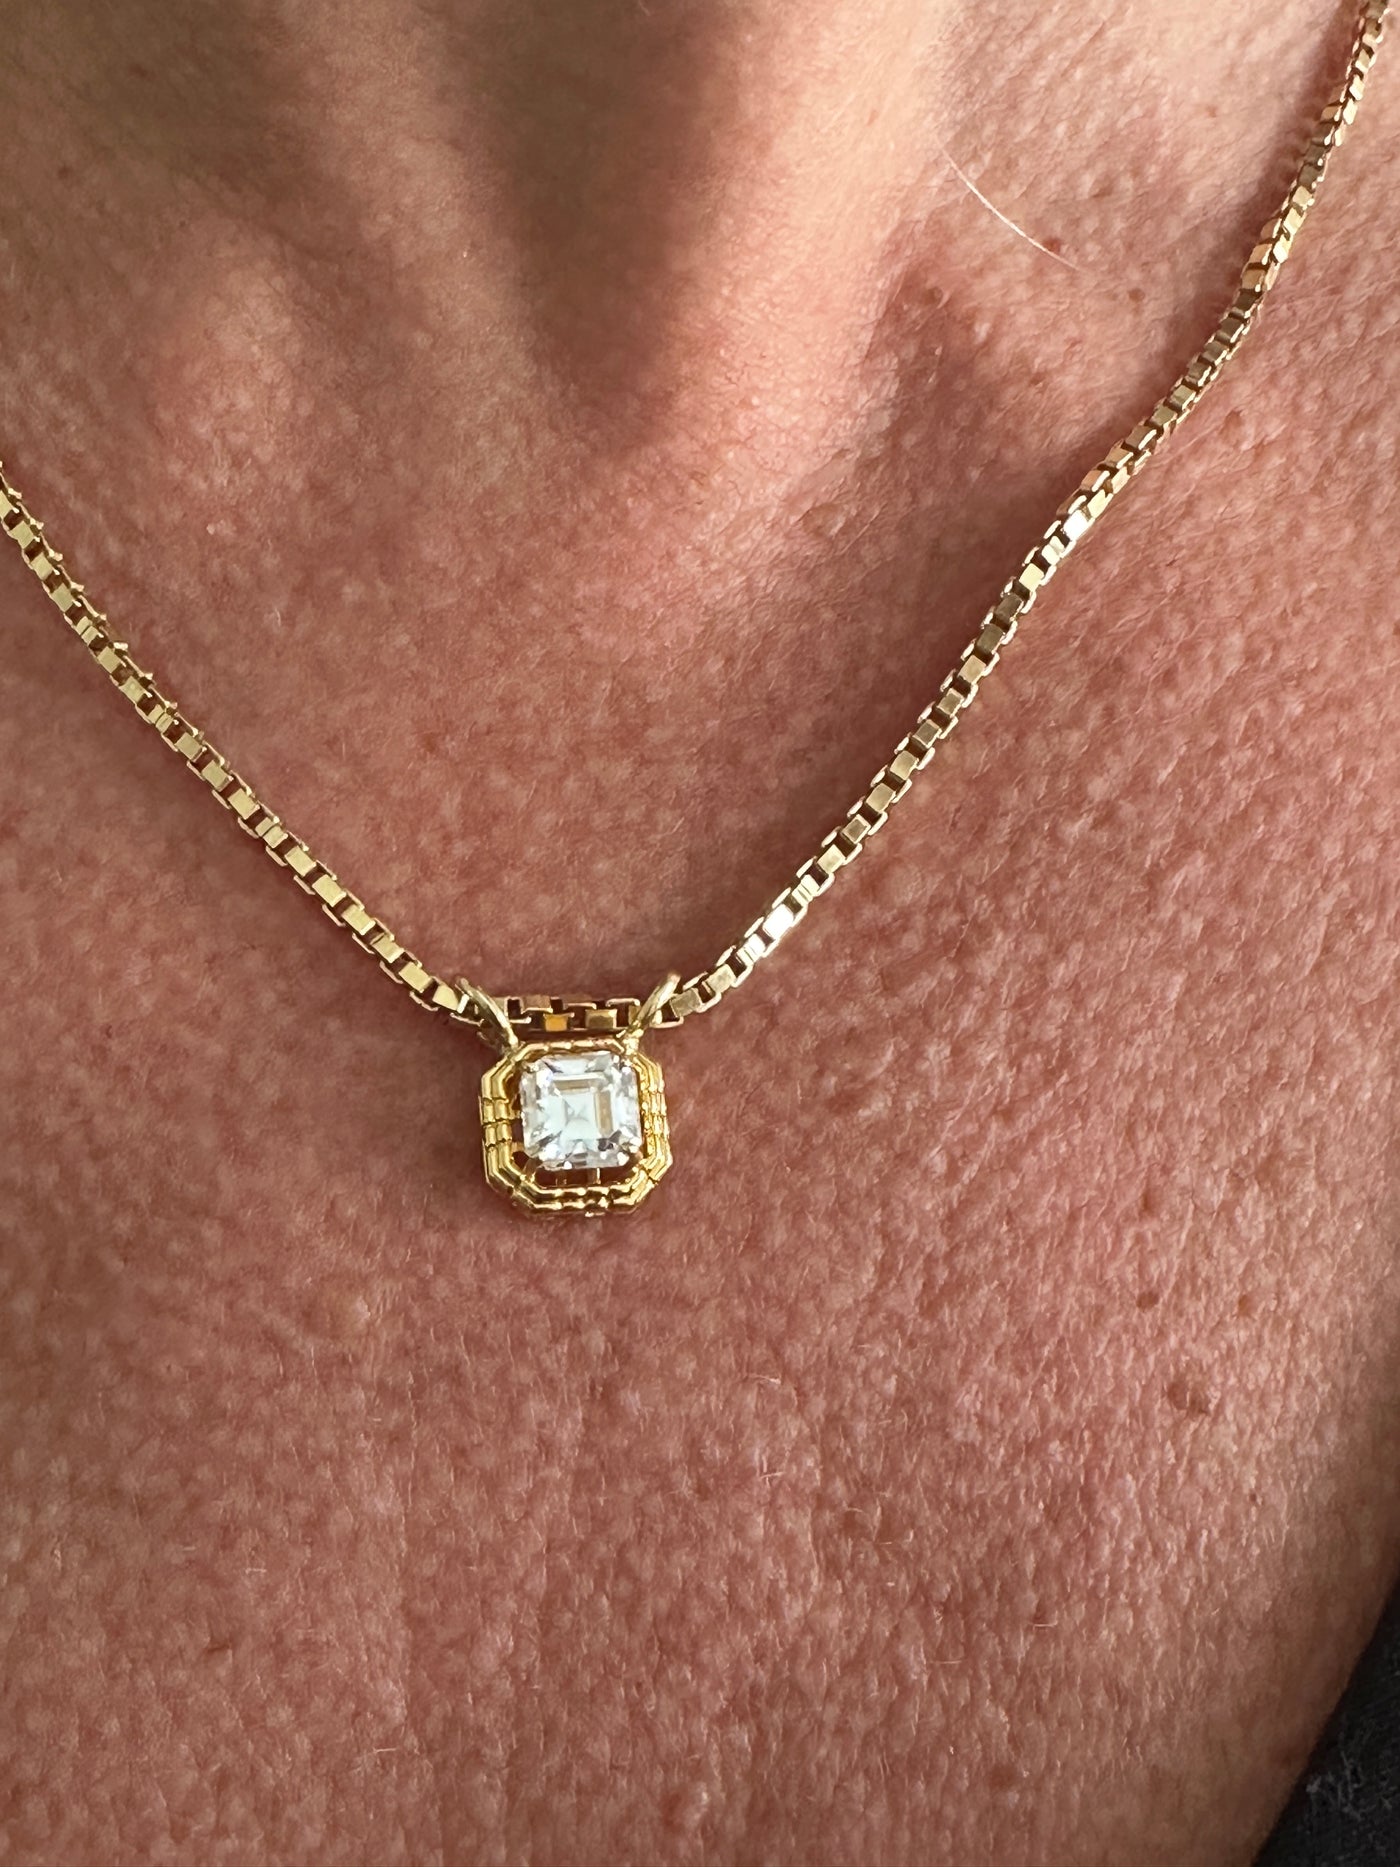 1ct Square Pendant Necklace - 14k Yellow Gold